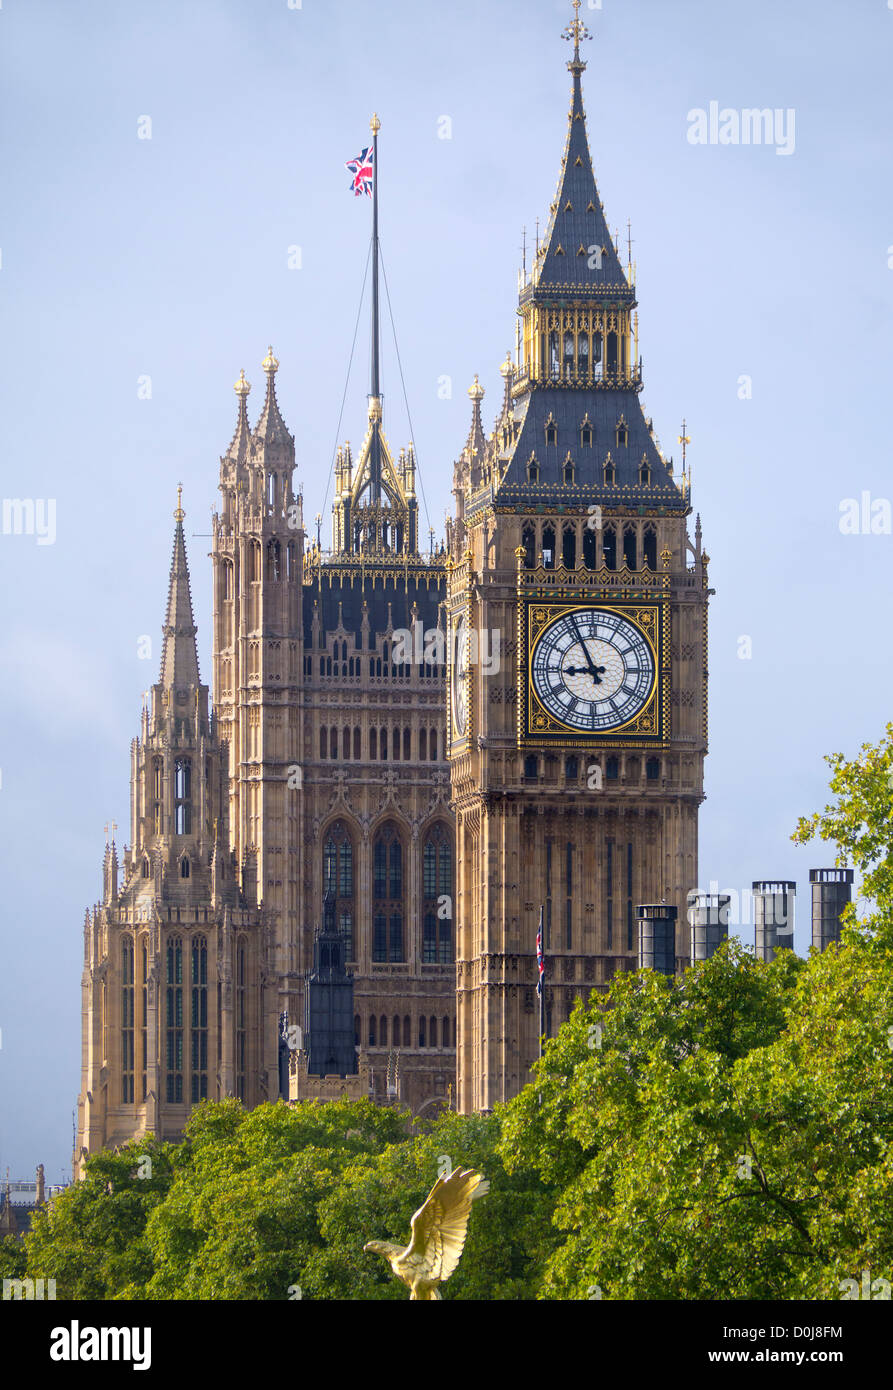 Big Ben und Victoria Tower am Palace of Westminster in London. Stockfoto